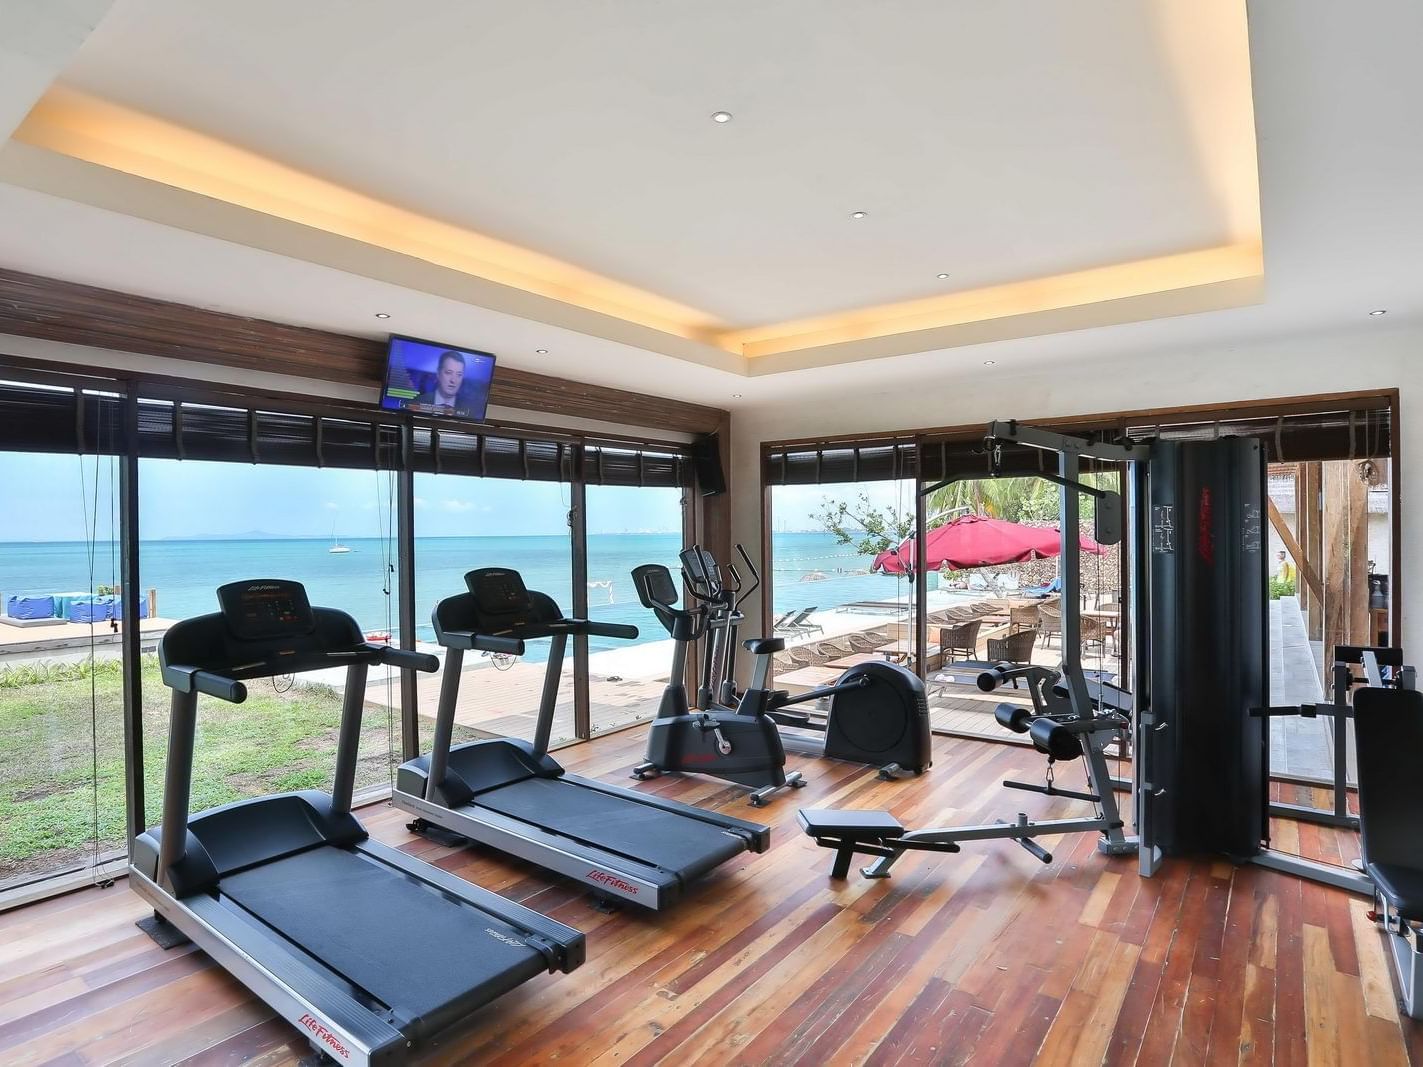 Equipment of Gym with sea view at U Hotels and Resorts